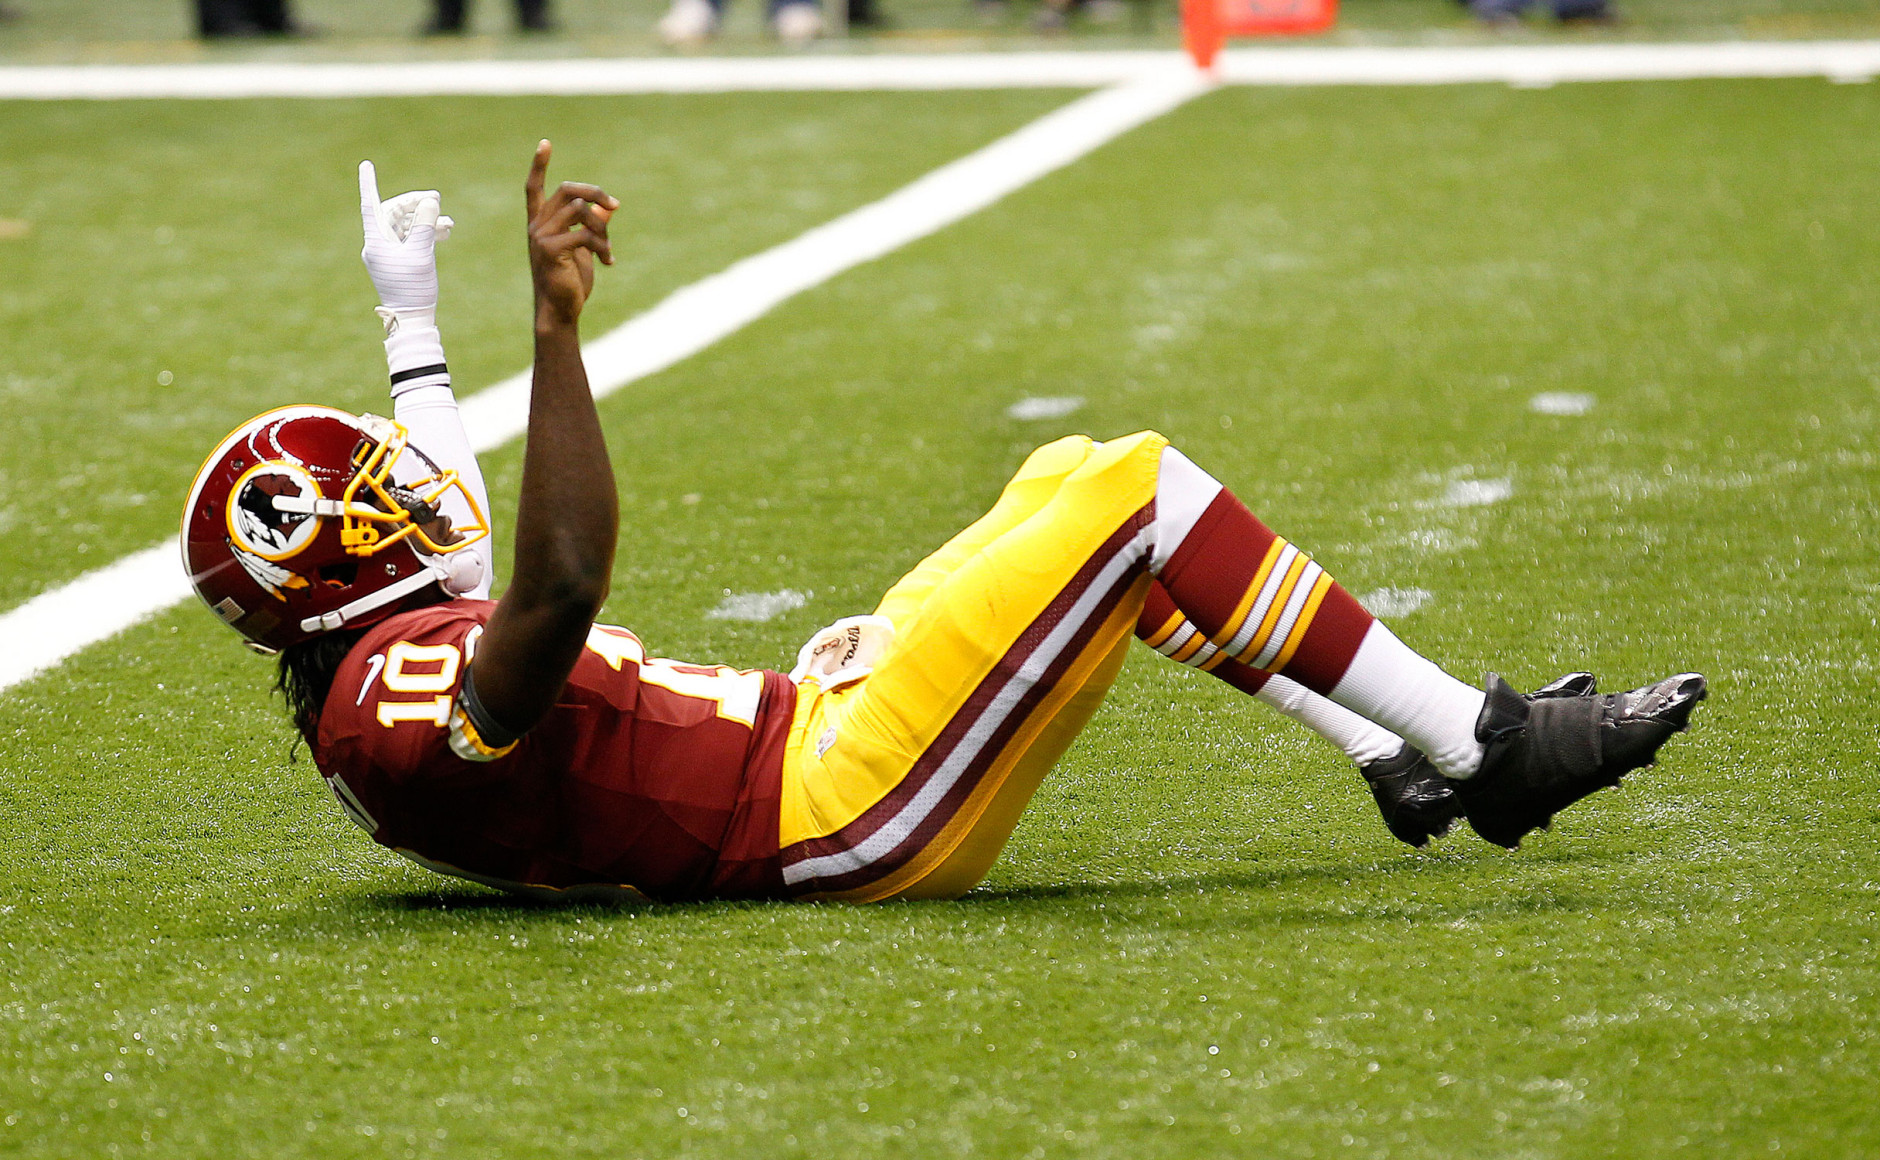 This season's Redskins schedule will bring back plenty of memories, good and bad. (AP Photo/Bill Haber)